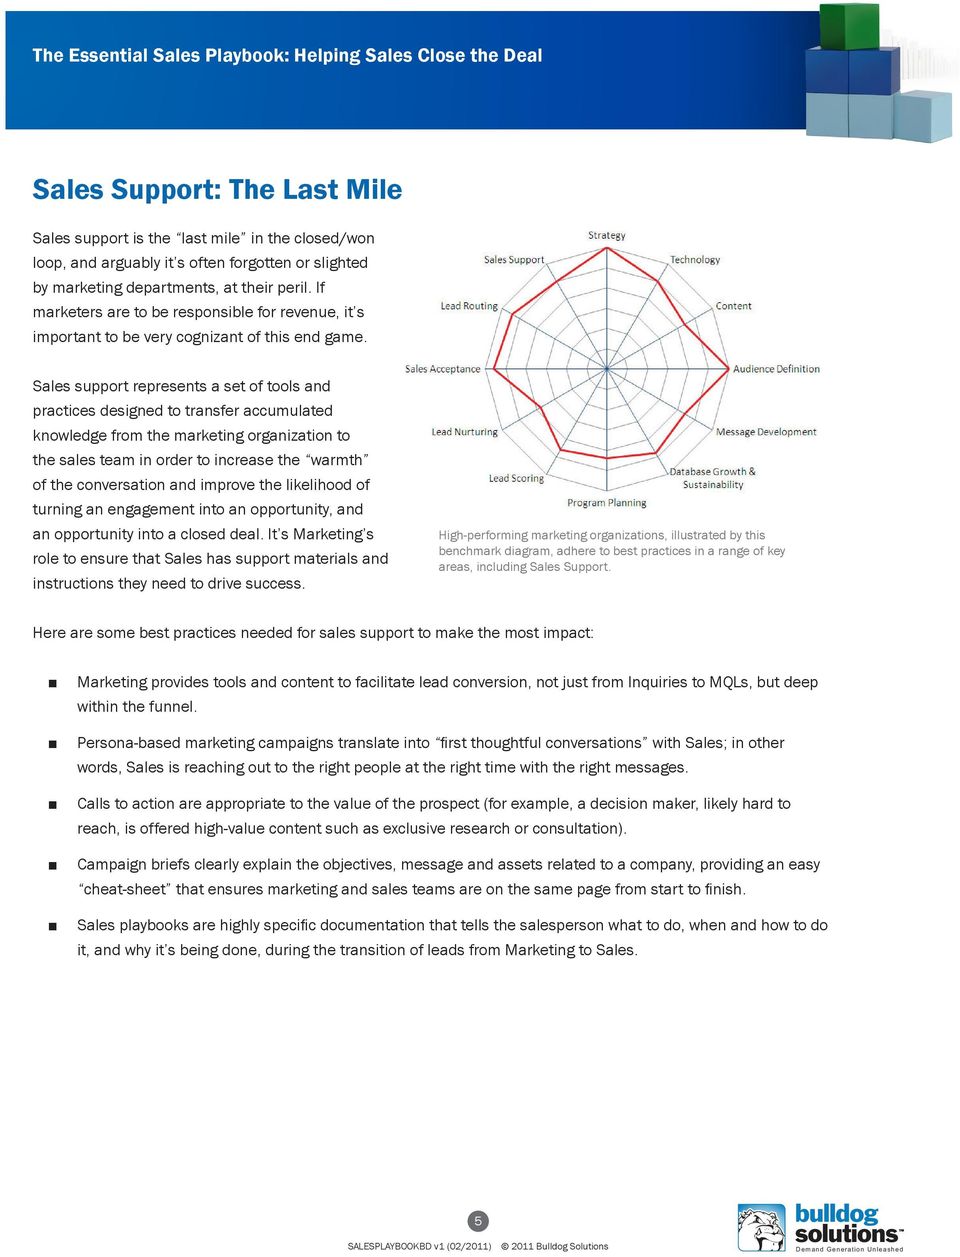 Sales support represents a set of tools and practices designed to transfer accumulated knowledge from the marketing organization to the sales team in order to increase the warmth of the conversation